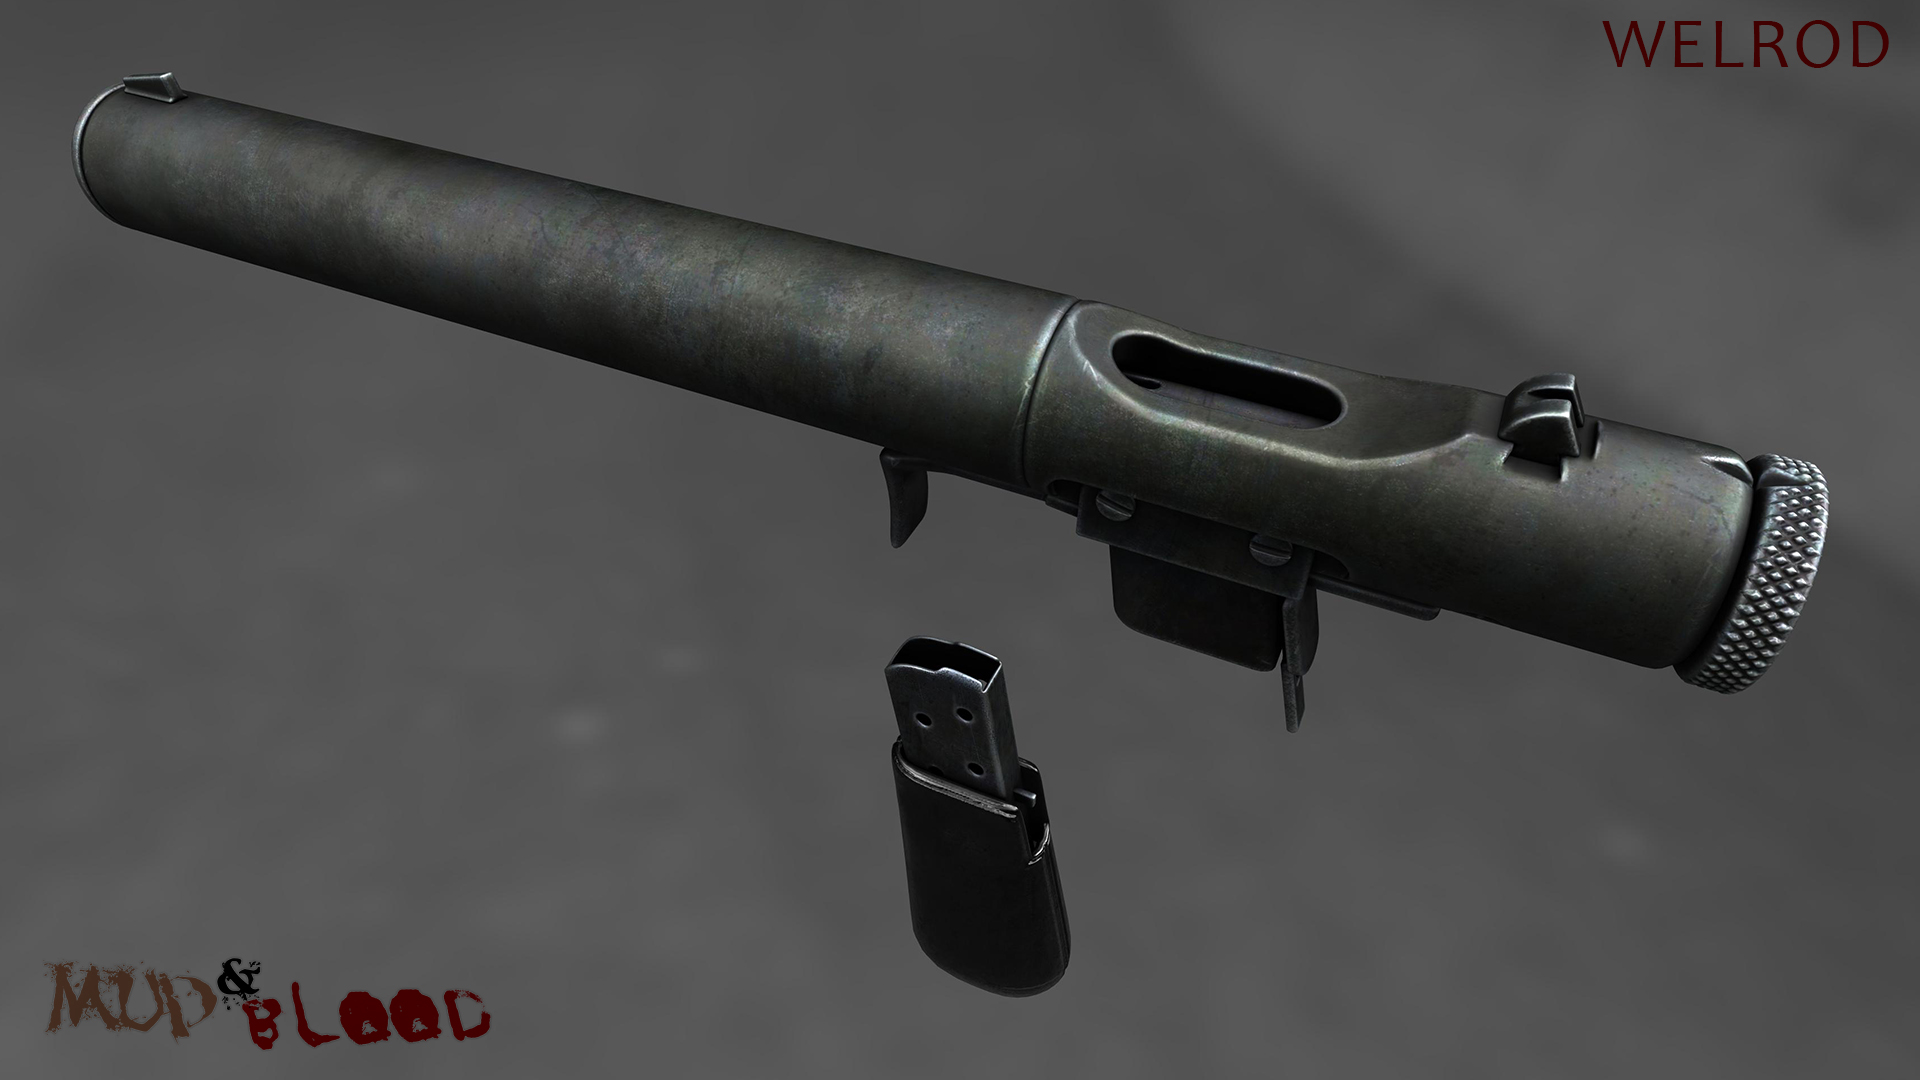 The Welrod is a British bolt action, magazine fed, suppressed pistol devise...